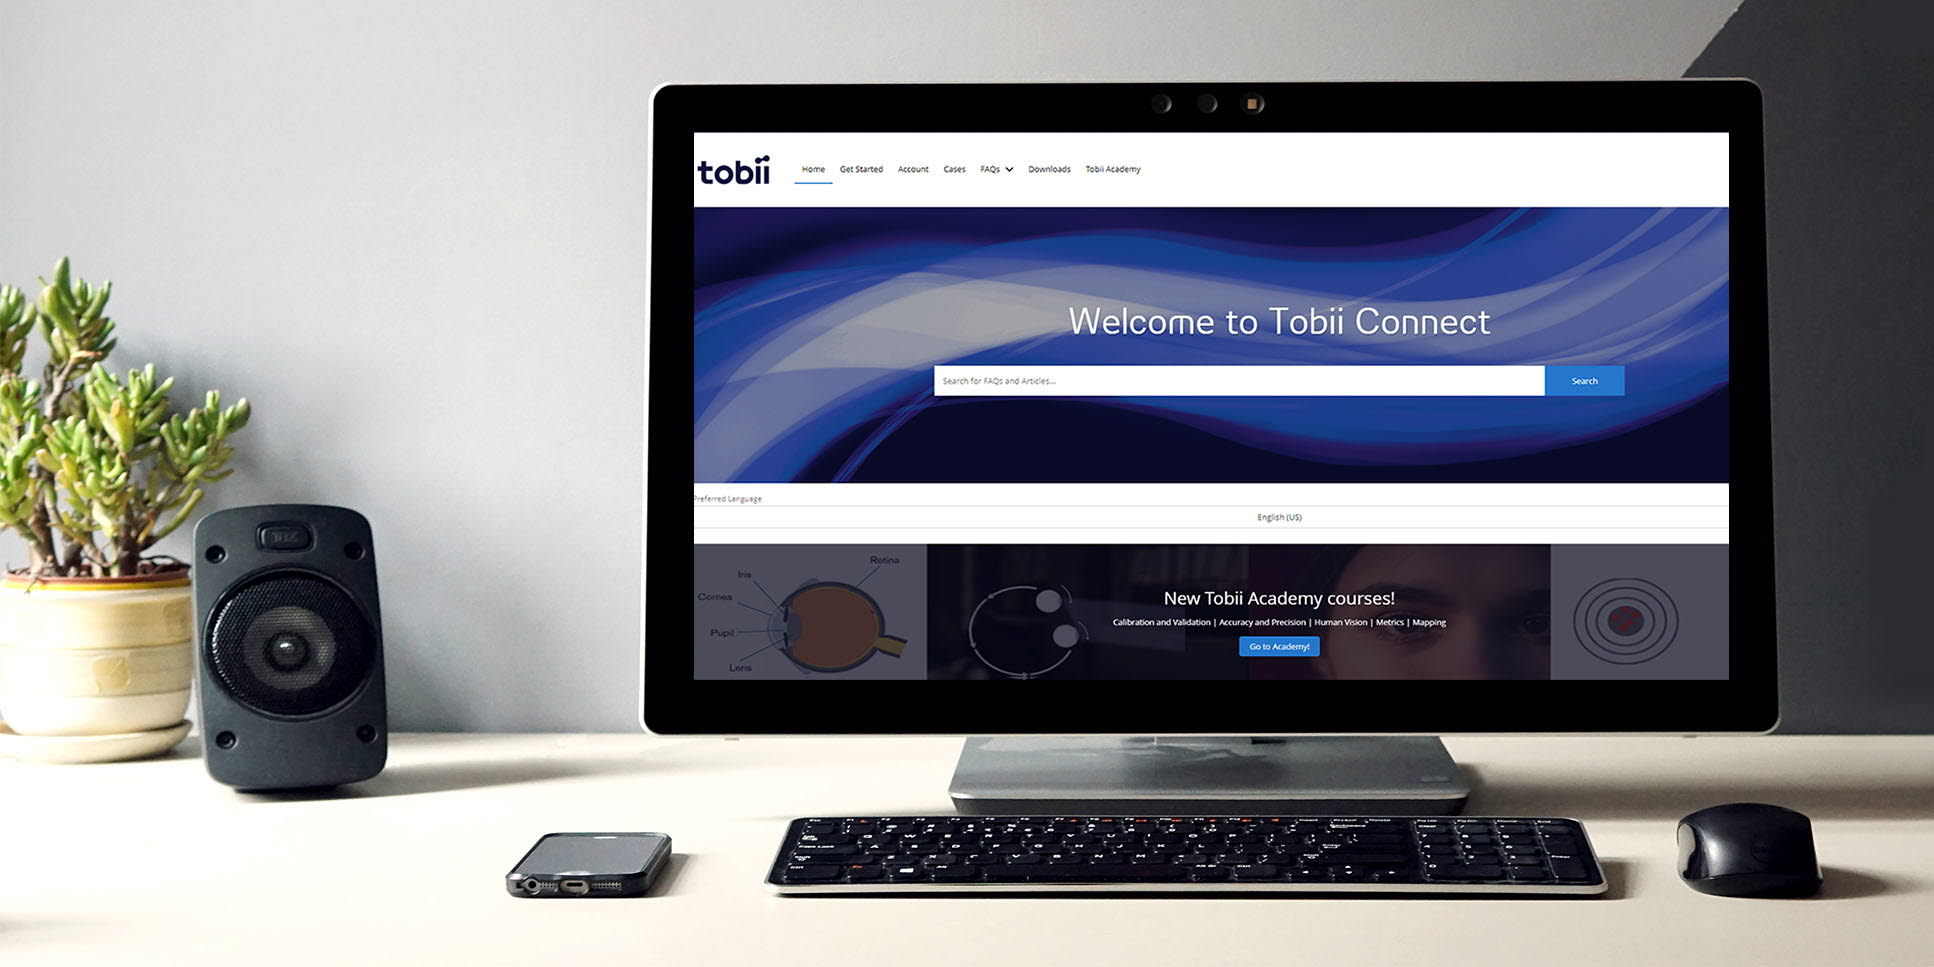 Tobii Connect